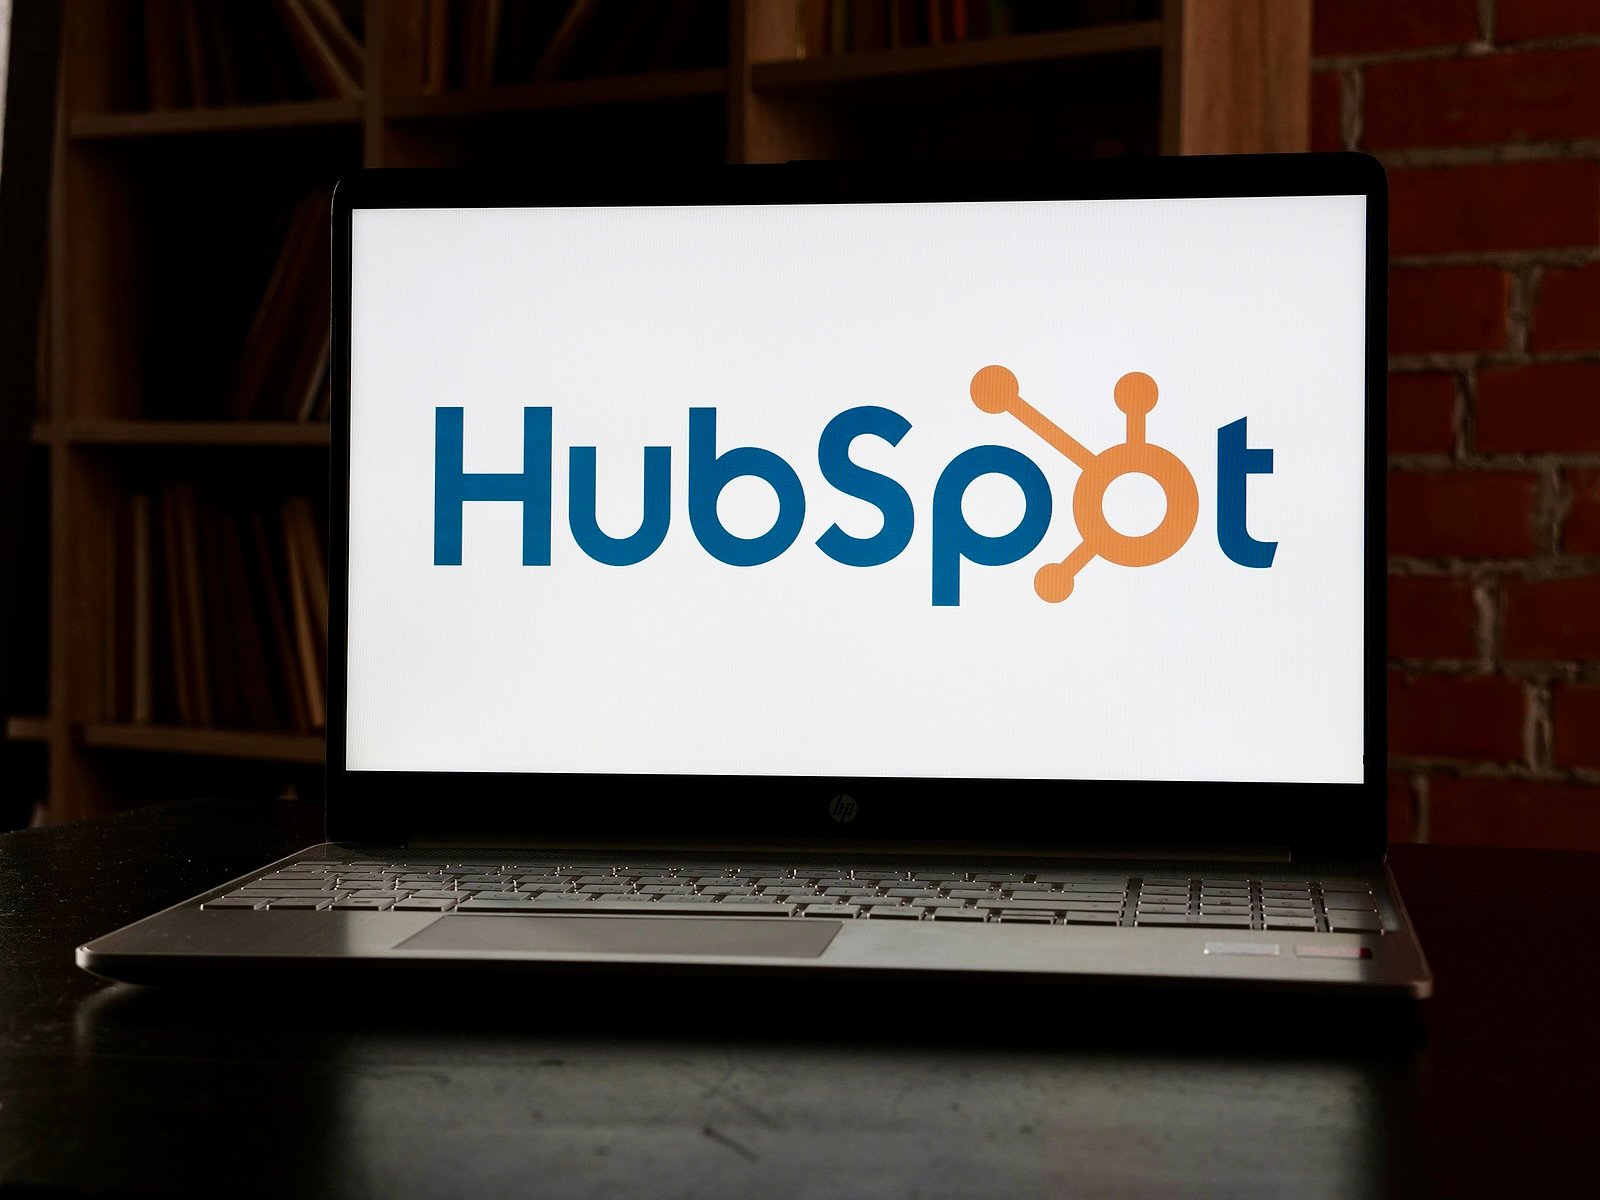 HubSpot displayed on computer after researching what is Hubspot and how does it work